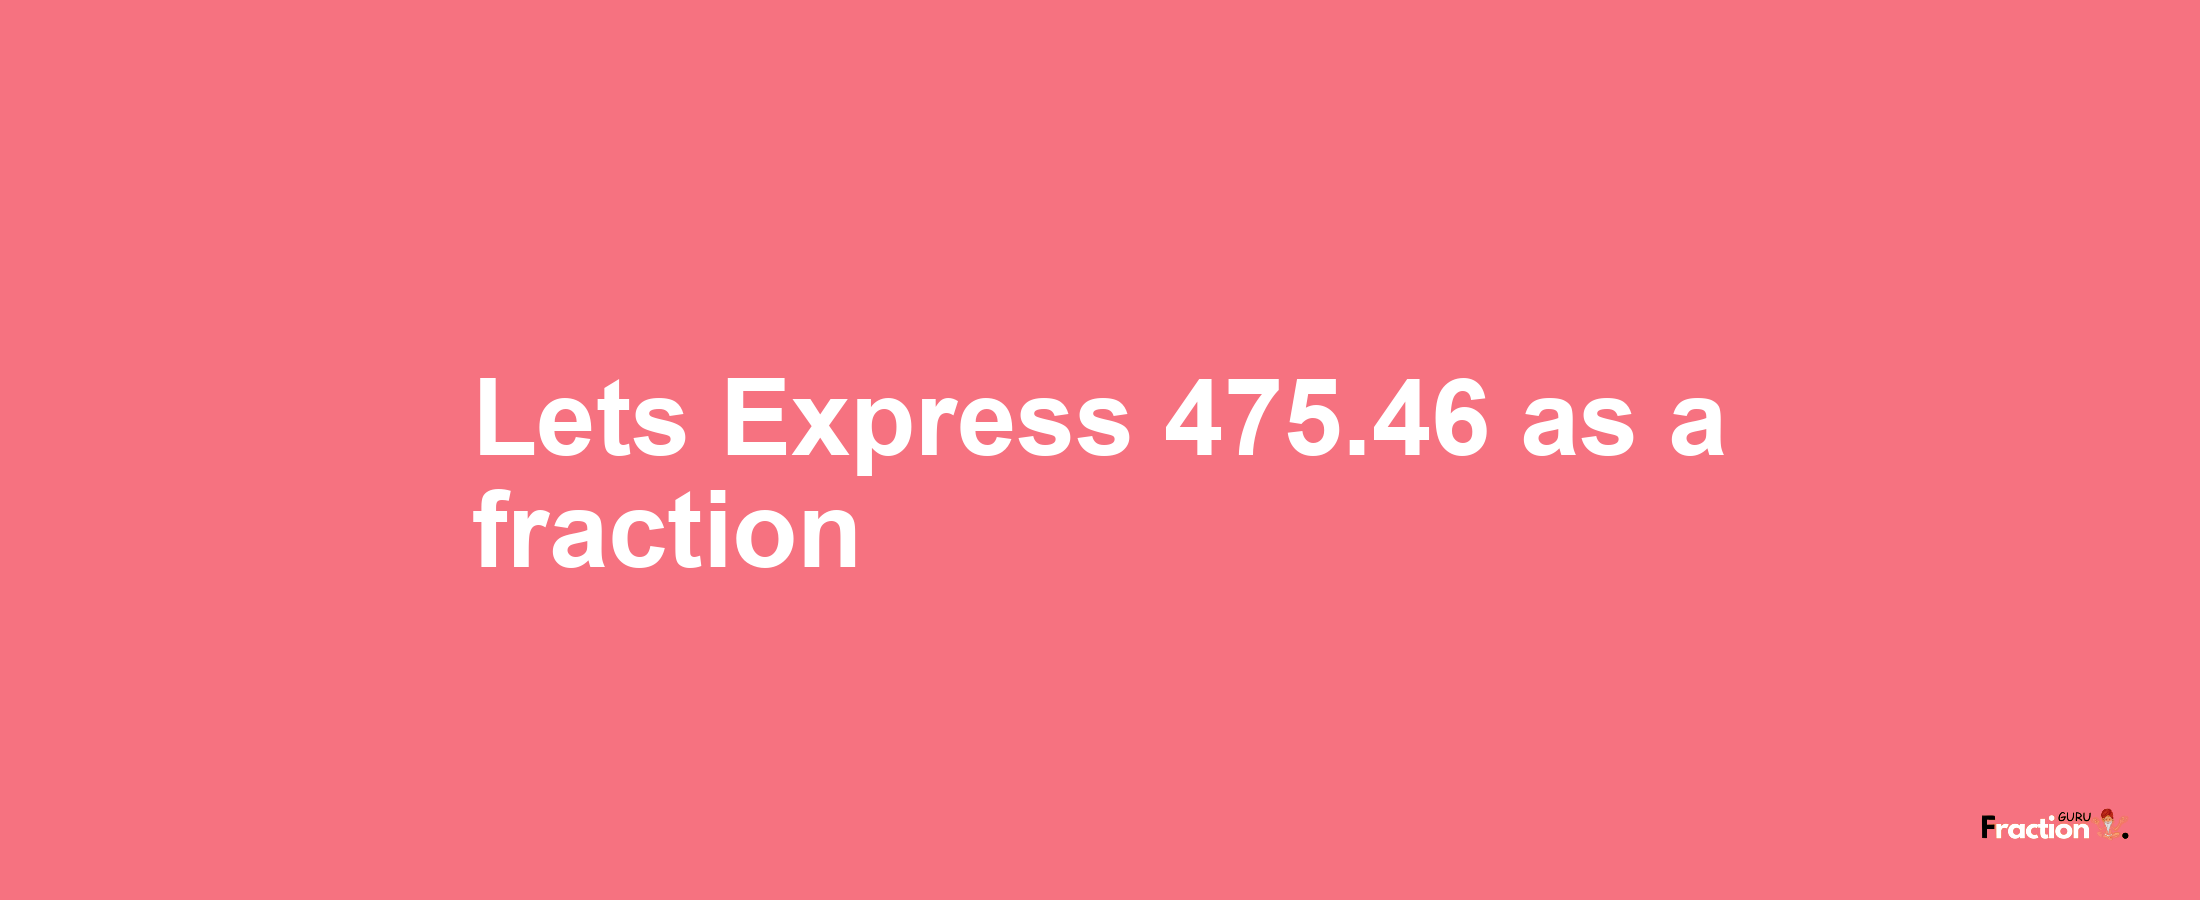 Lets Express 475.46 as afraction